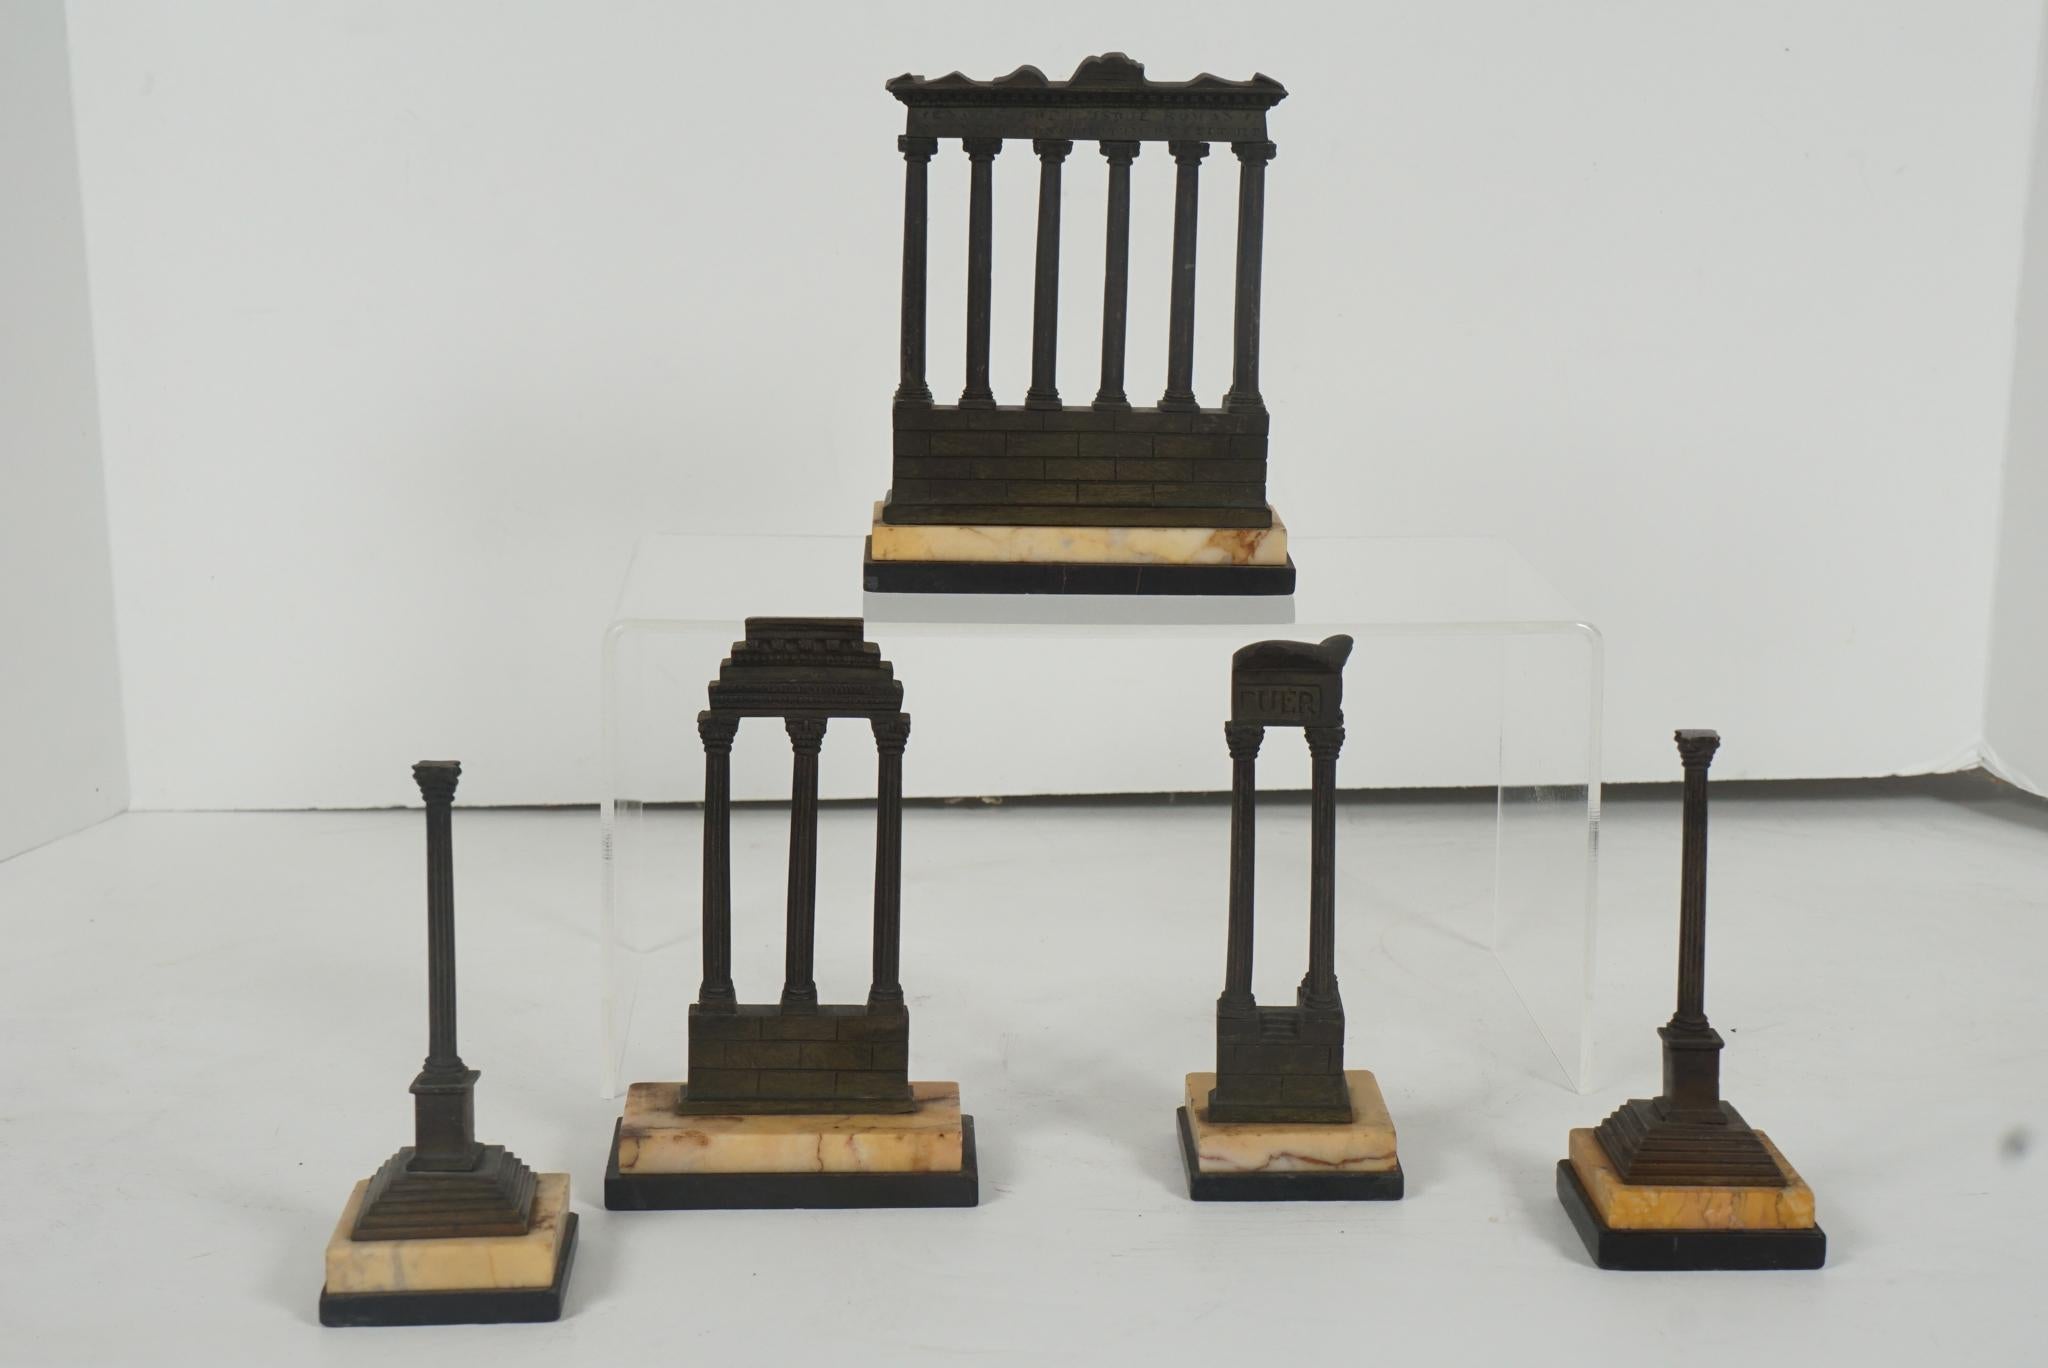 This very nice set of works represents some of the ruins in Rome from antiquity and where made in the late 19th century. 
The largest casting here is the Temple of Saturn built by Titus Larcius in 17 BC. The temple's front is composed of eight